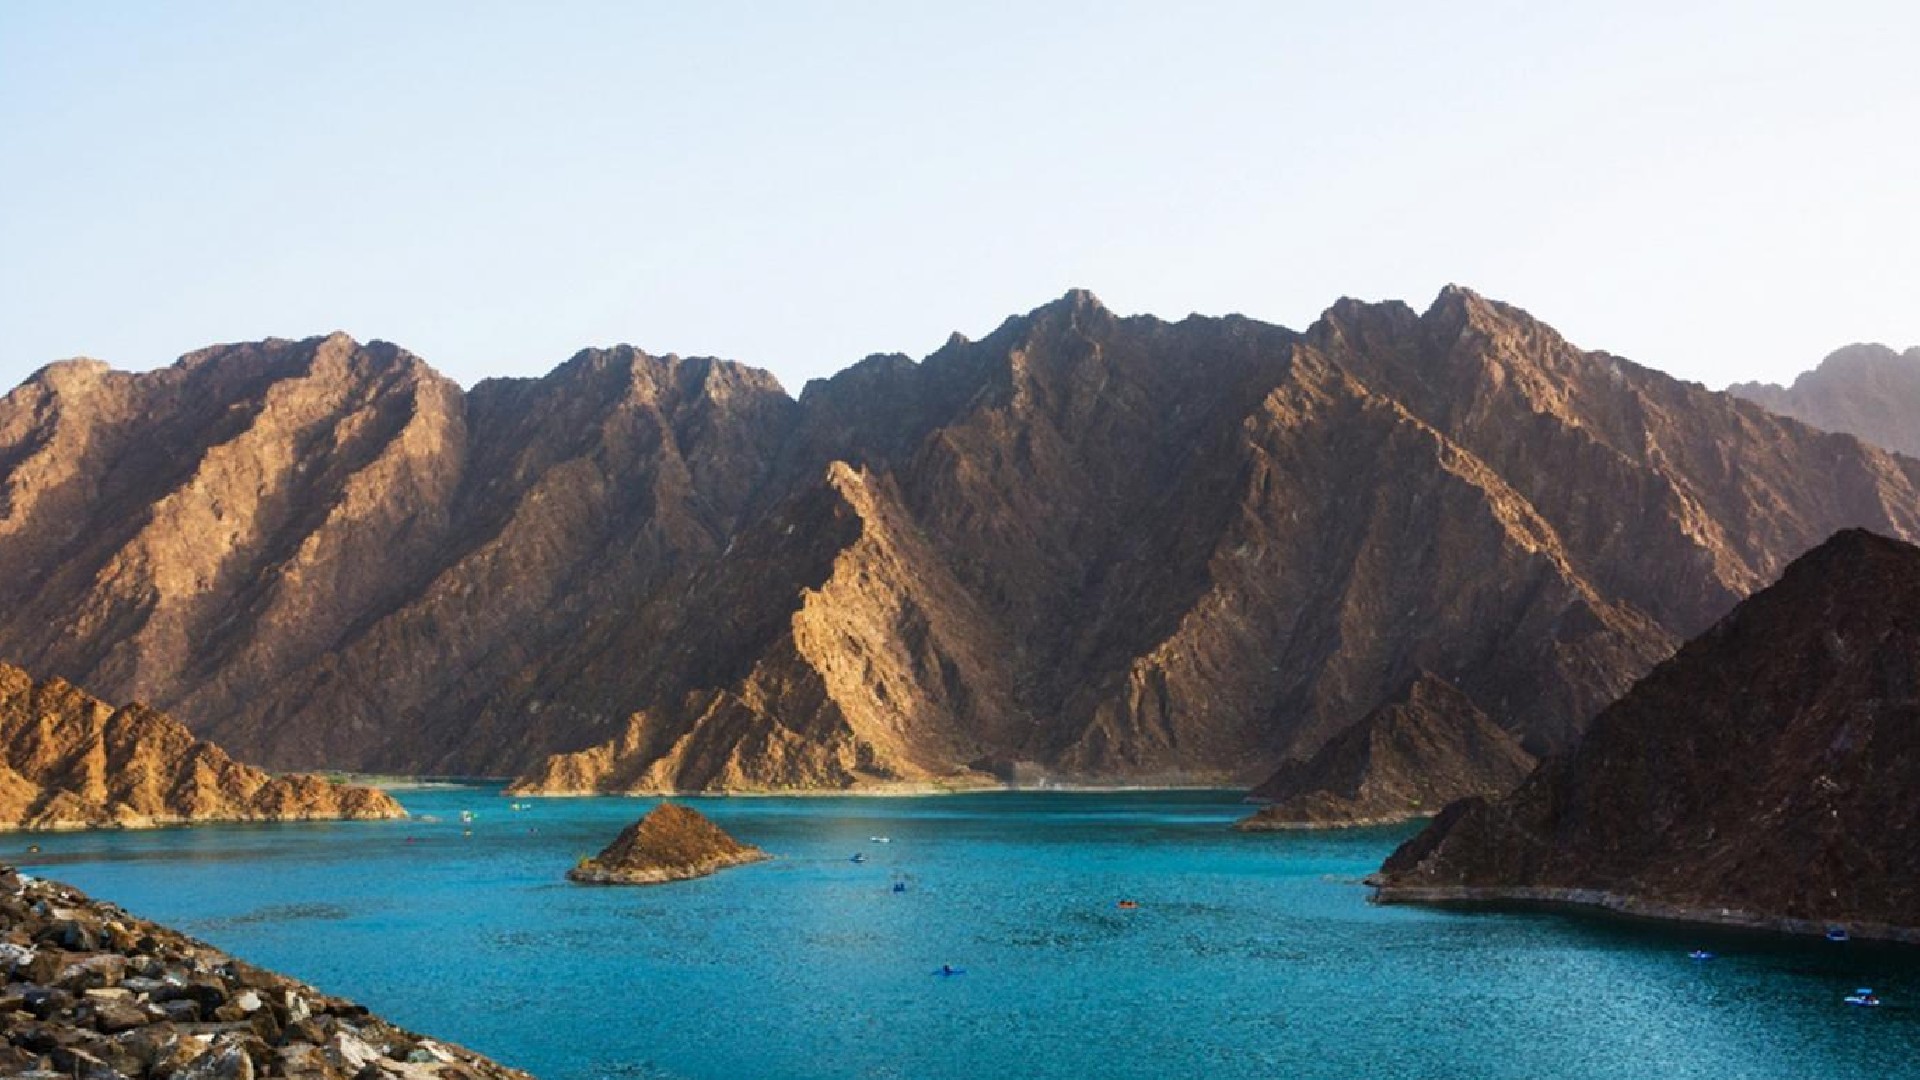 Hatta Now Has A Brand New Mountain Retreat That Will Let You Unwind On Nature’s Lap